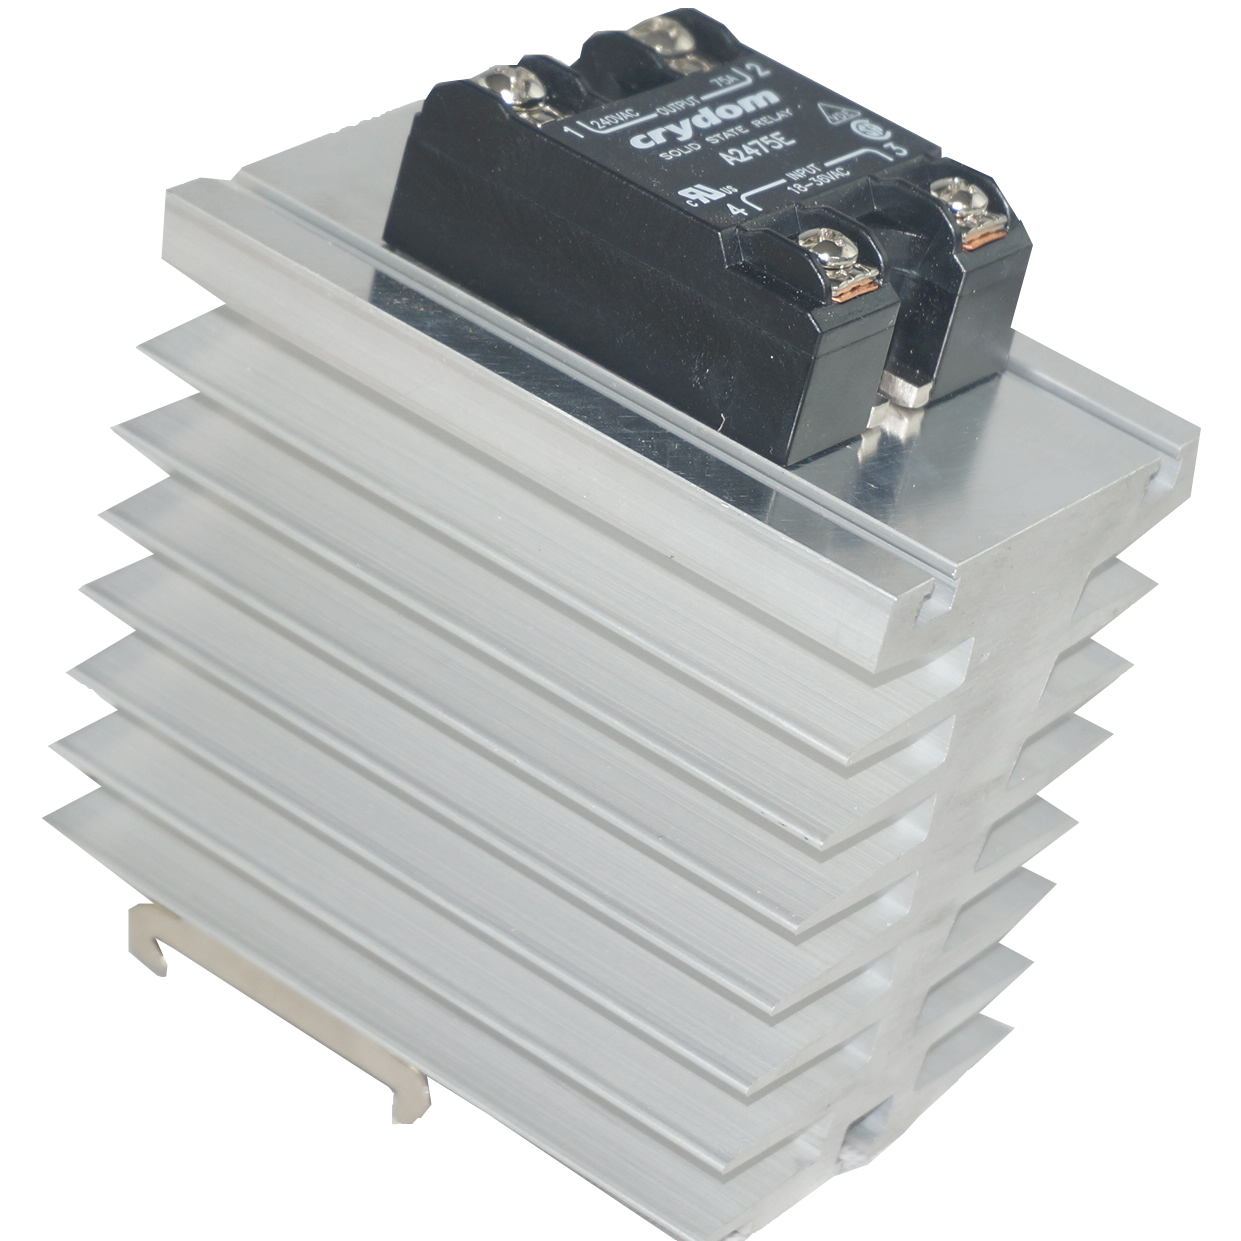 GFIN/100M-DR + HD6050, Din Rail Mount Solid State Relay with Heatsink, 4-32VDC Control Input, 48-660VAC Output, 50 Amps @ 40 Deg C ambient